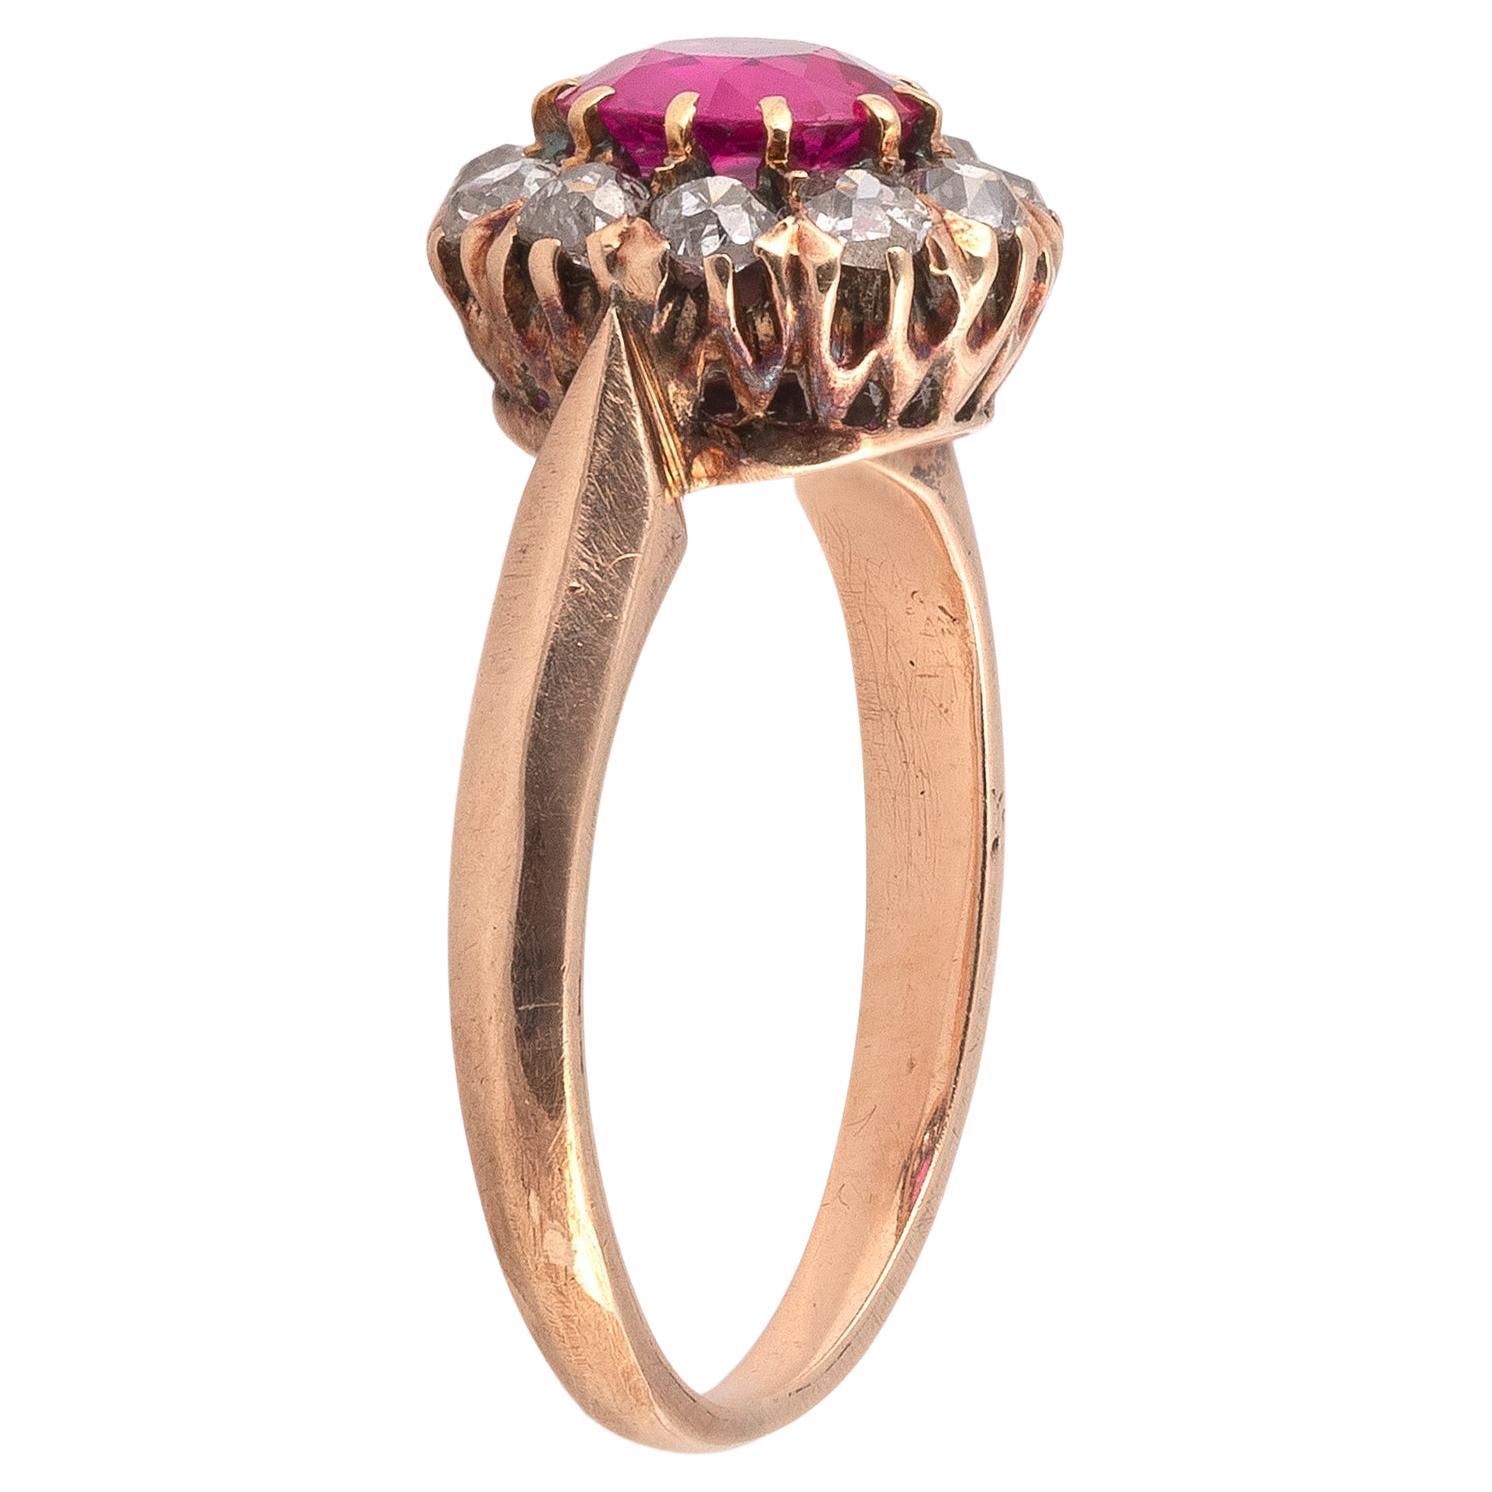 Early 20th century ruby diamond cluster ring circa 1910 set in 18ct gold and platinum. The central ruby is approximately 90 points with 1 carat of surrounding diamonds.
Size: 6
Weight: 2,25gr.